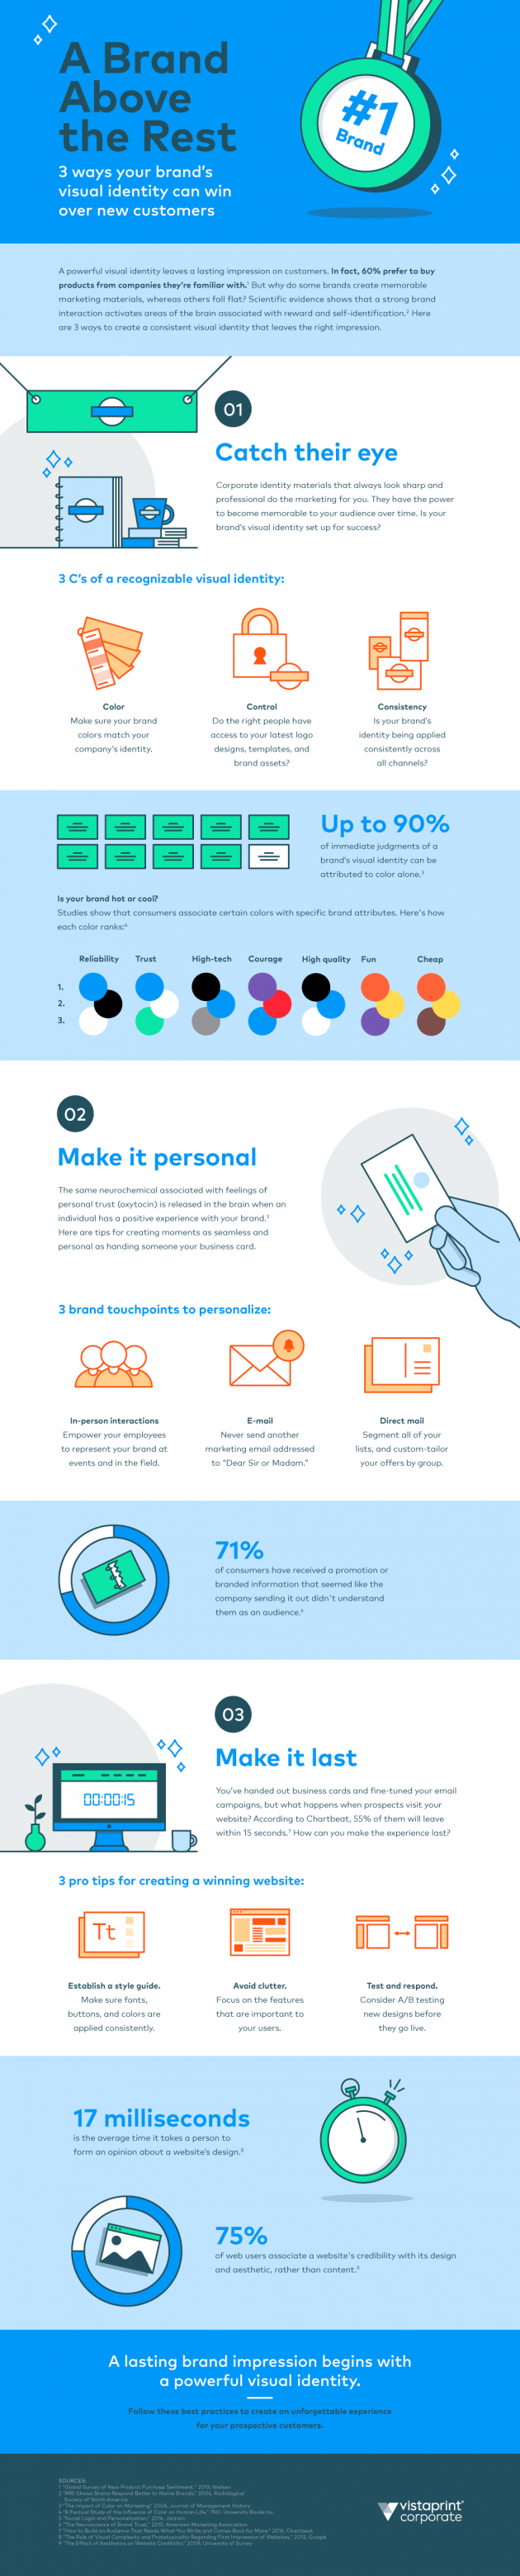 3 Tips for Creating a Memorable Visual Brand Identity - #Infographic